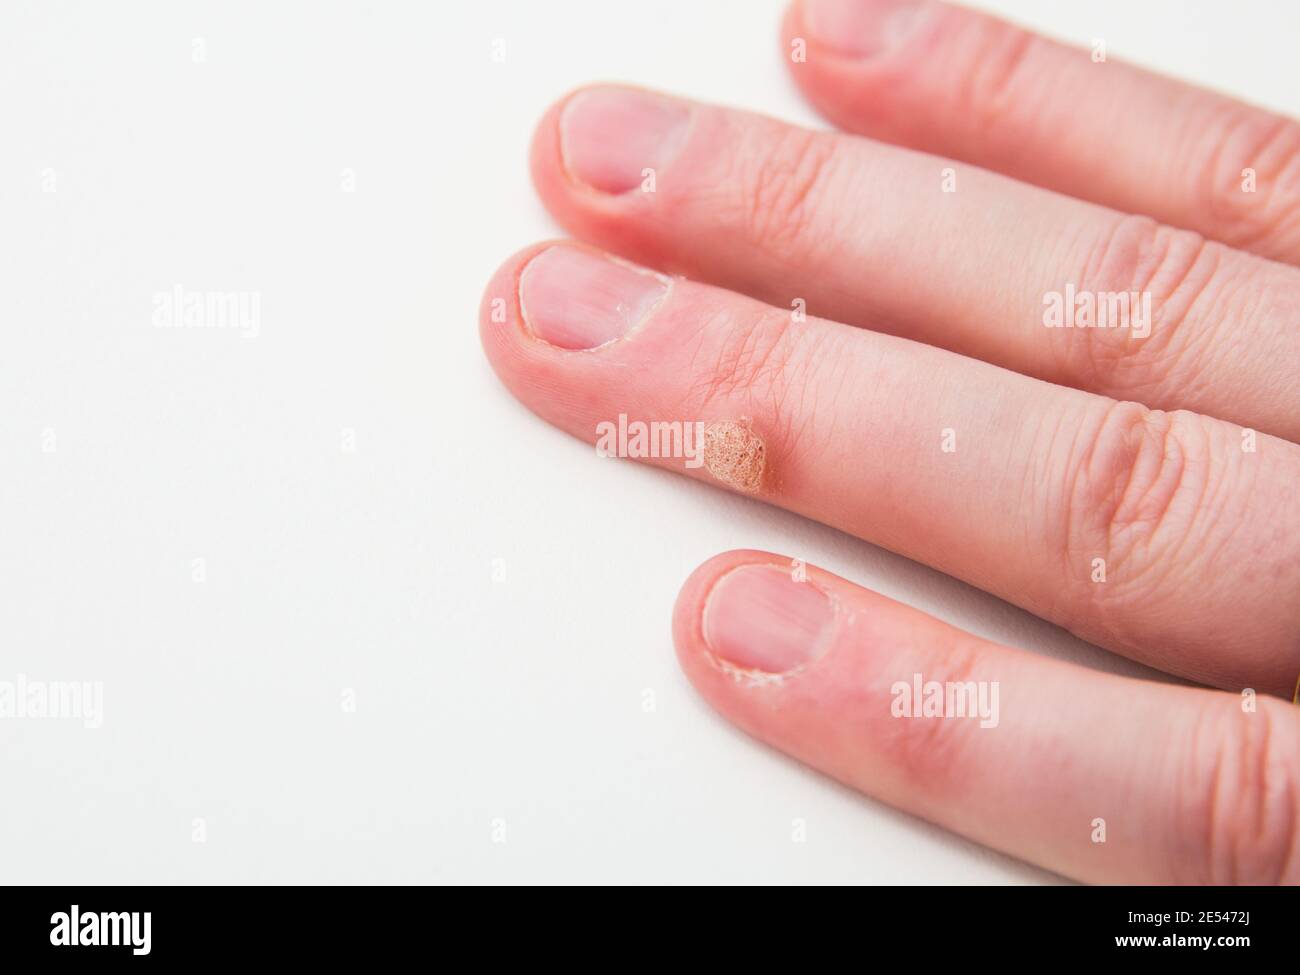 Close up view of skin disease called wart caused by human papilloma virus on human finger. Stock Photo